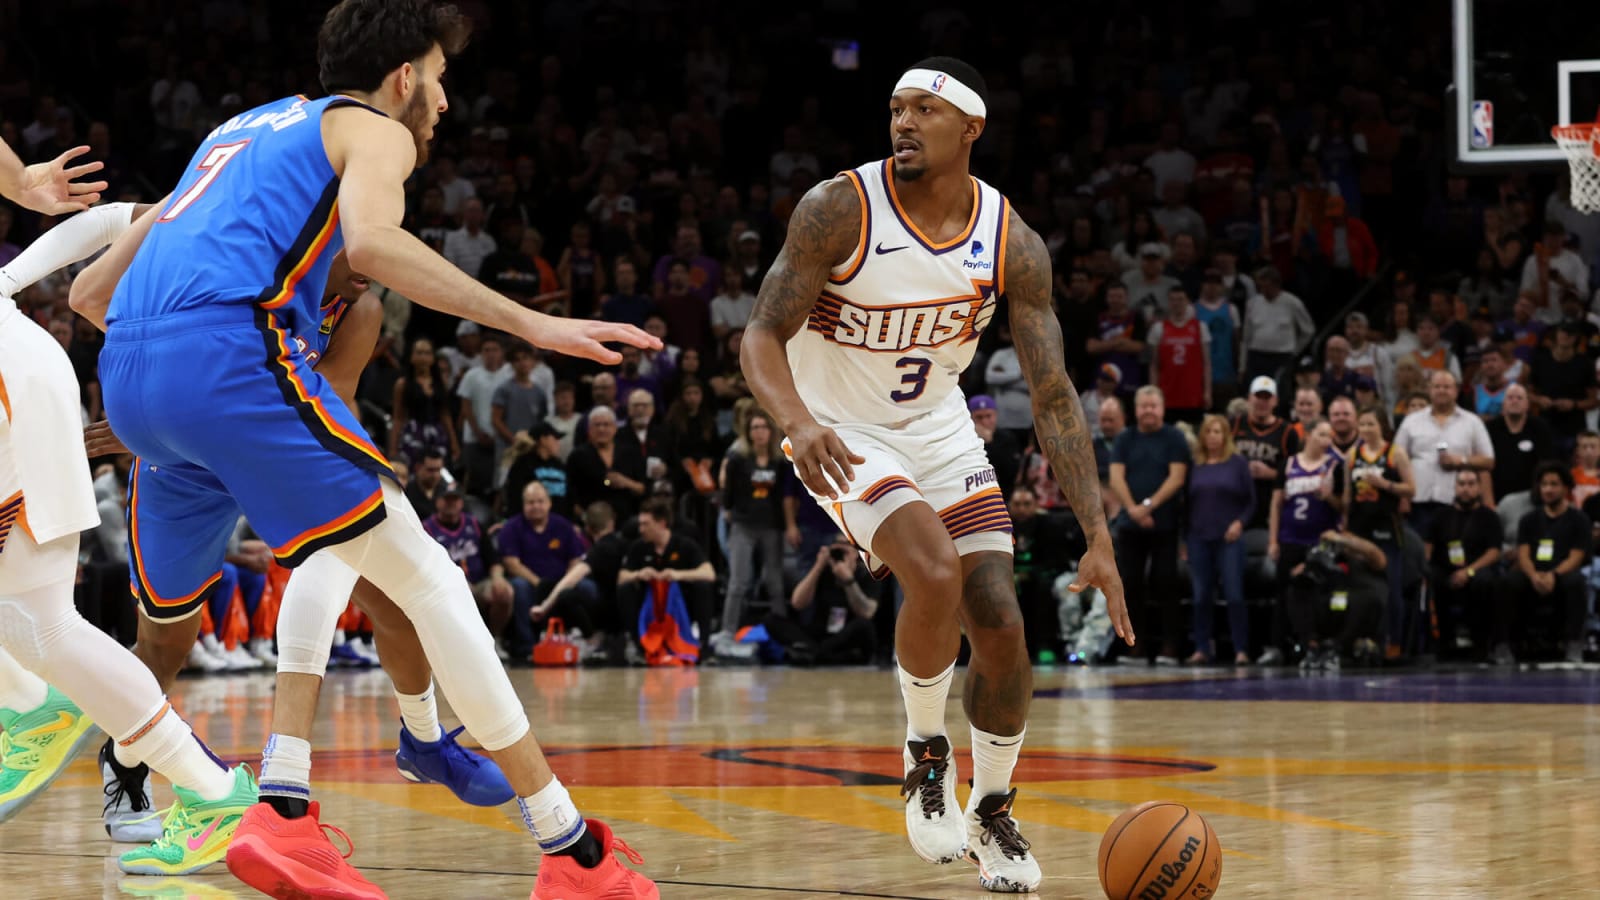 No Kevin Durant, Bradley Beal or Devin Booker for Phoenix Suns